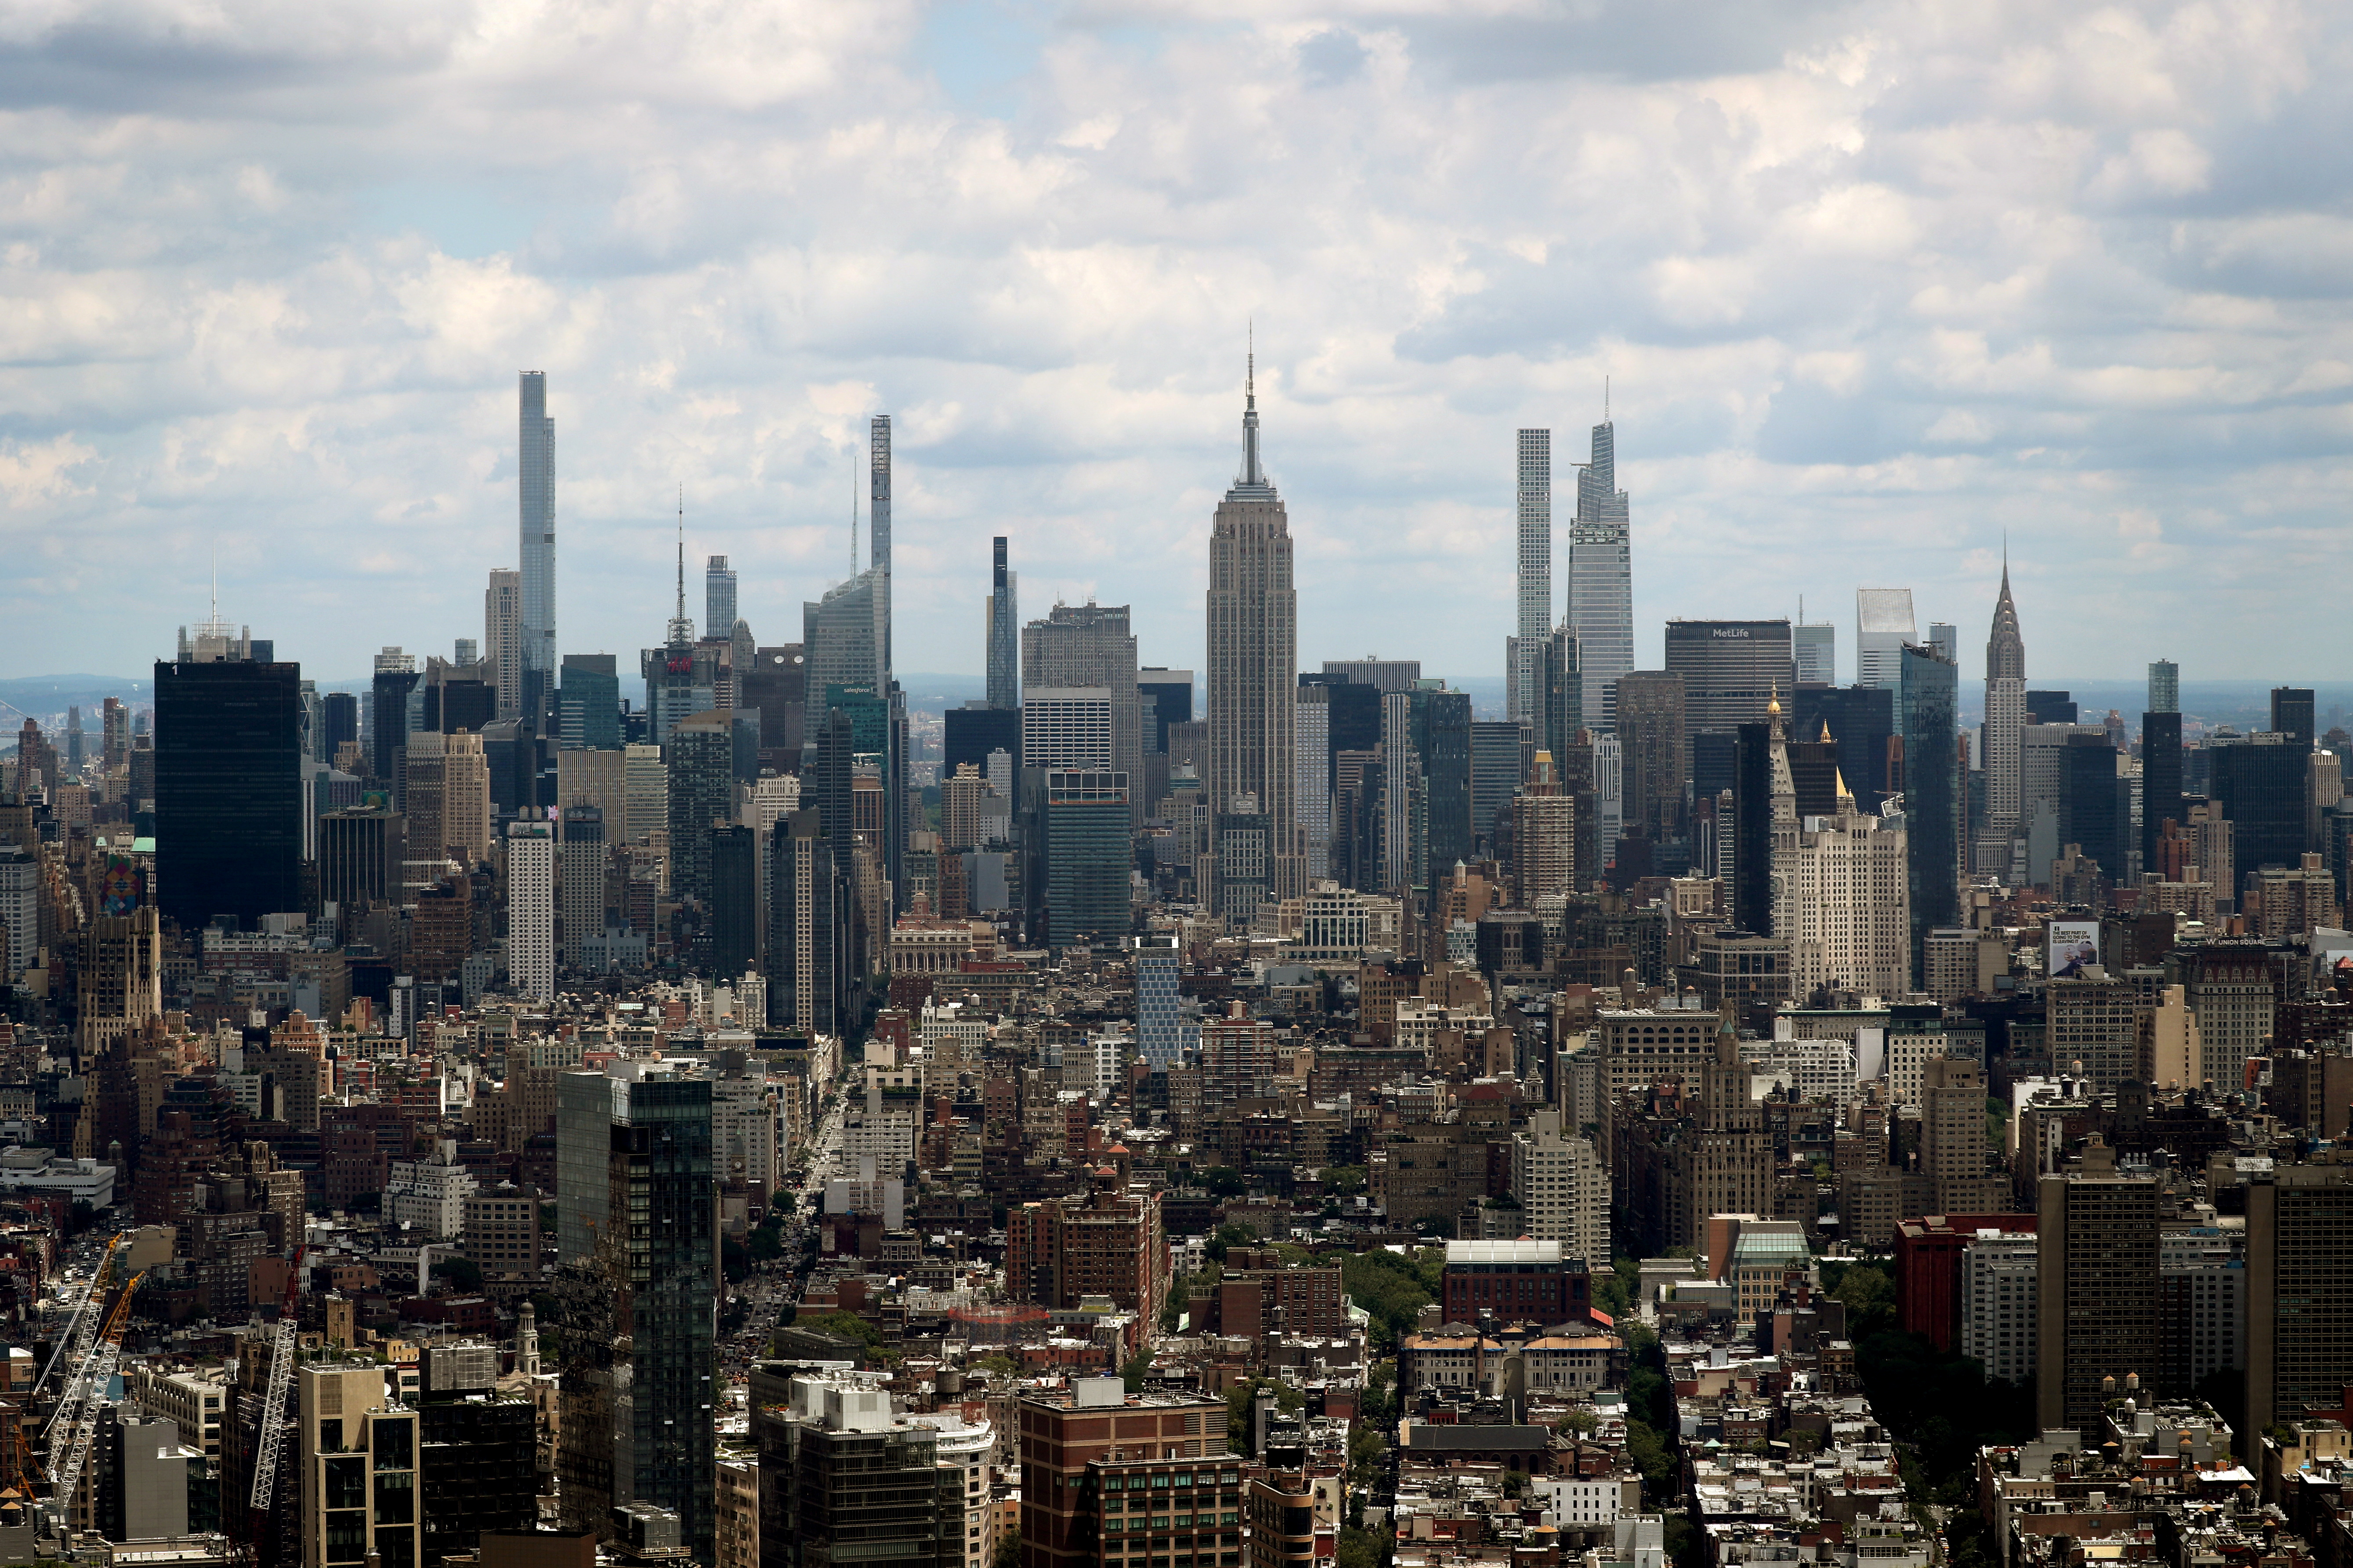 A general view of the skyline of Manhattan as seen from the One World Trade Center Tower in New York